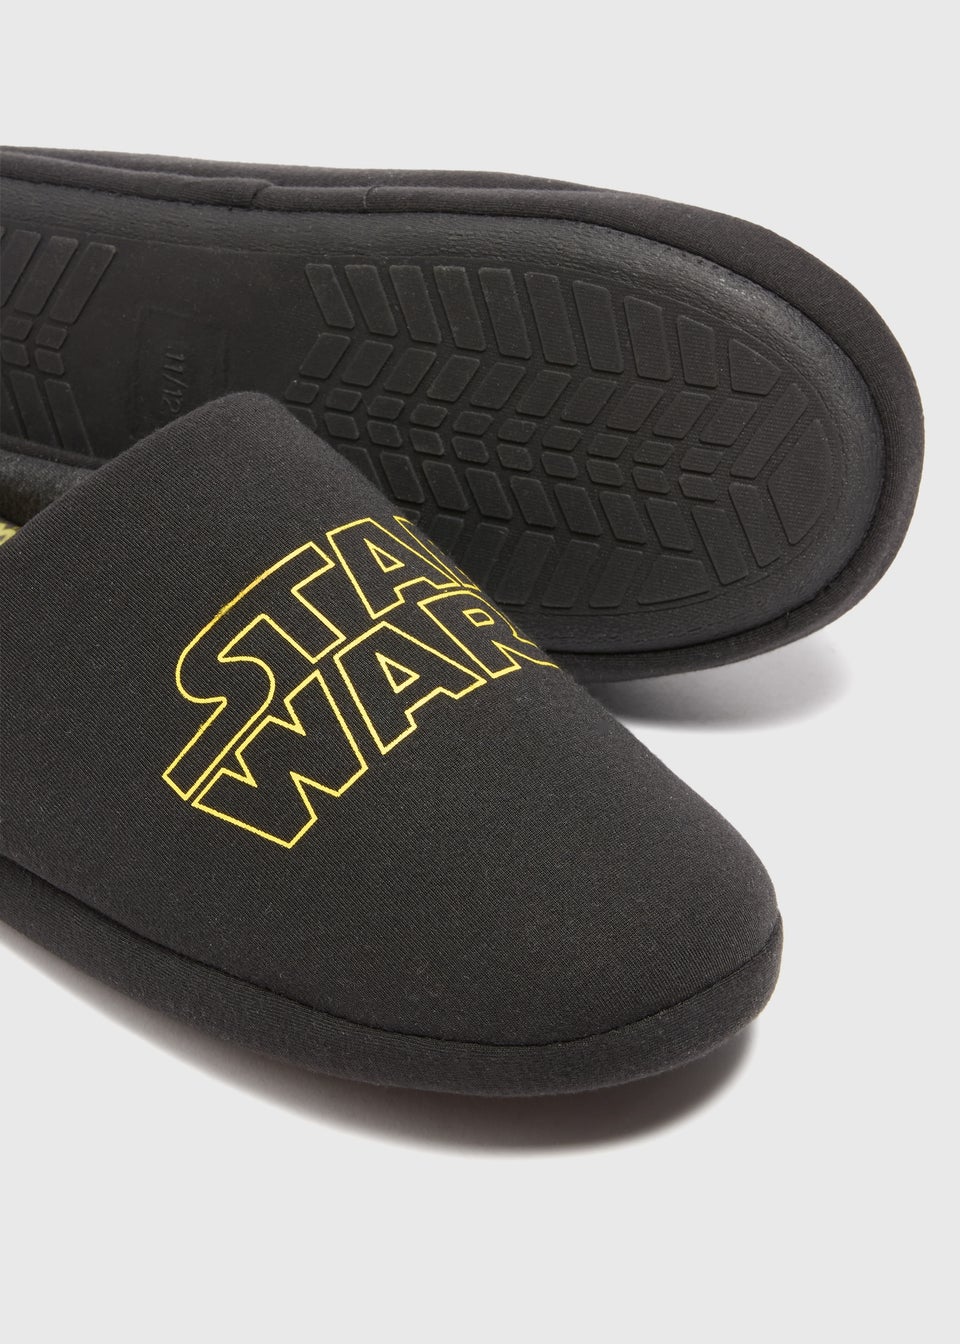 Star Wars Charcoal Slippers